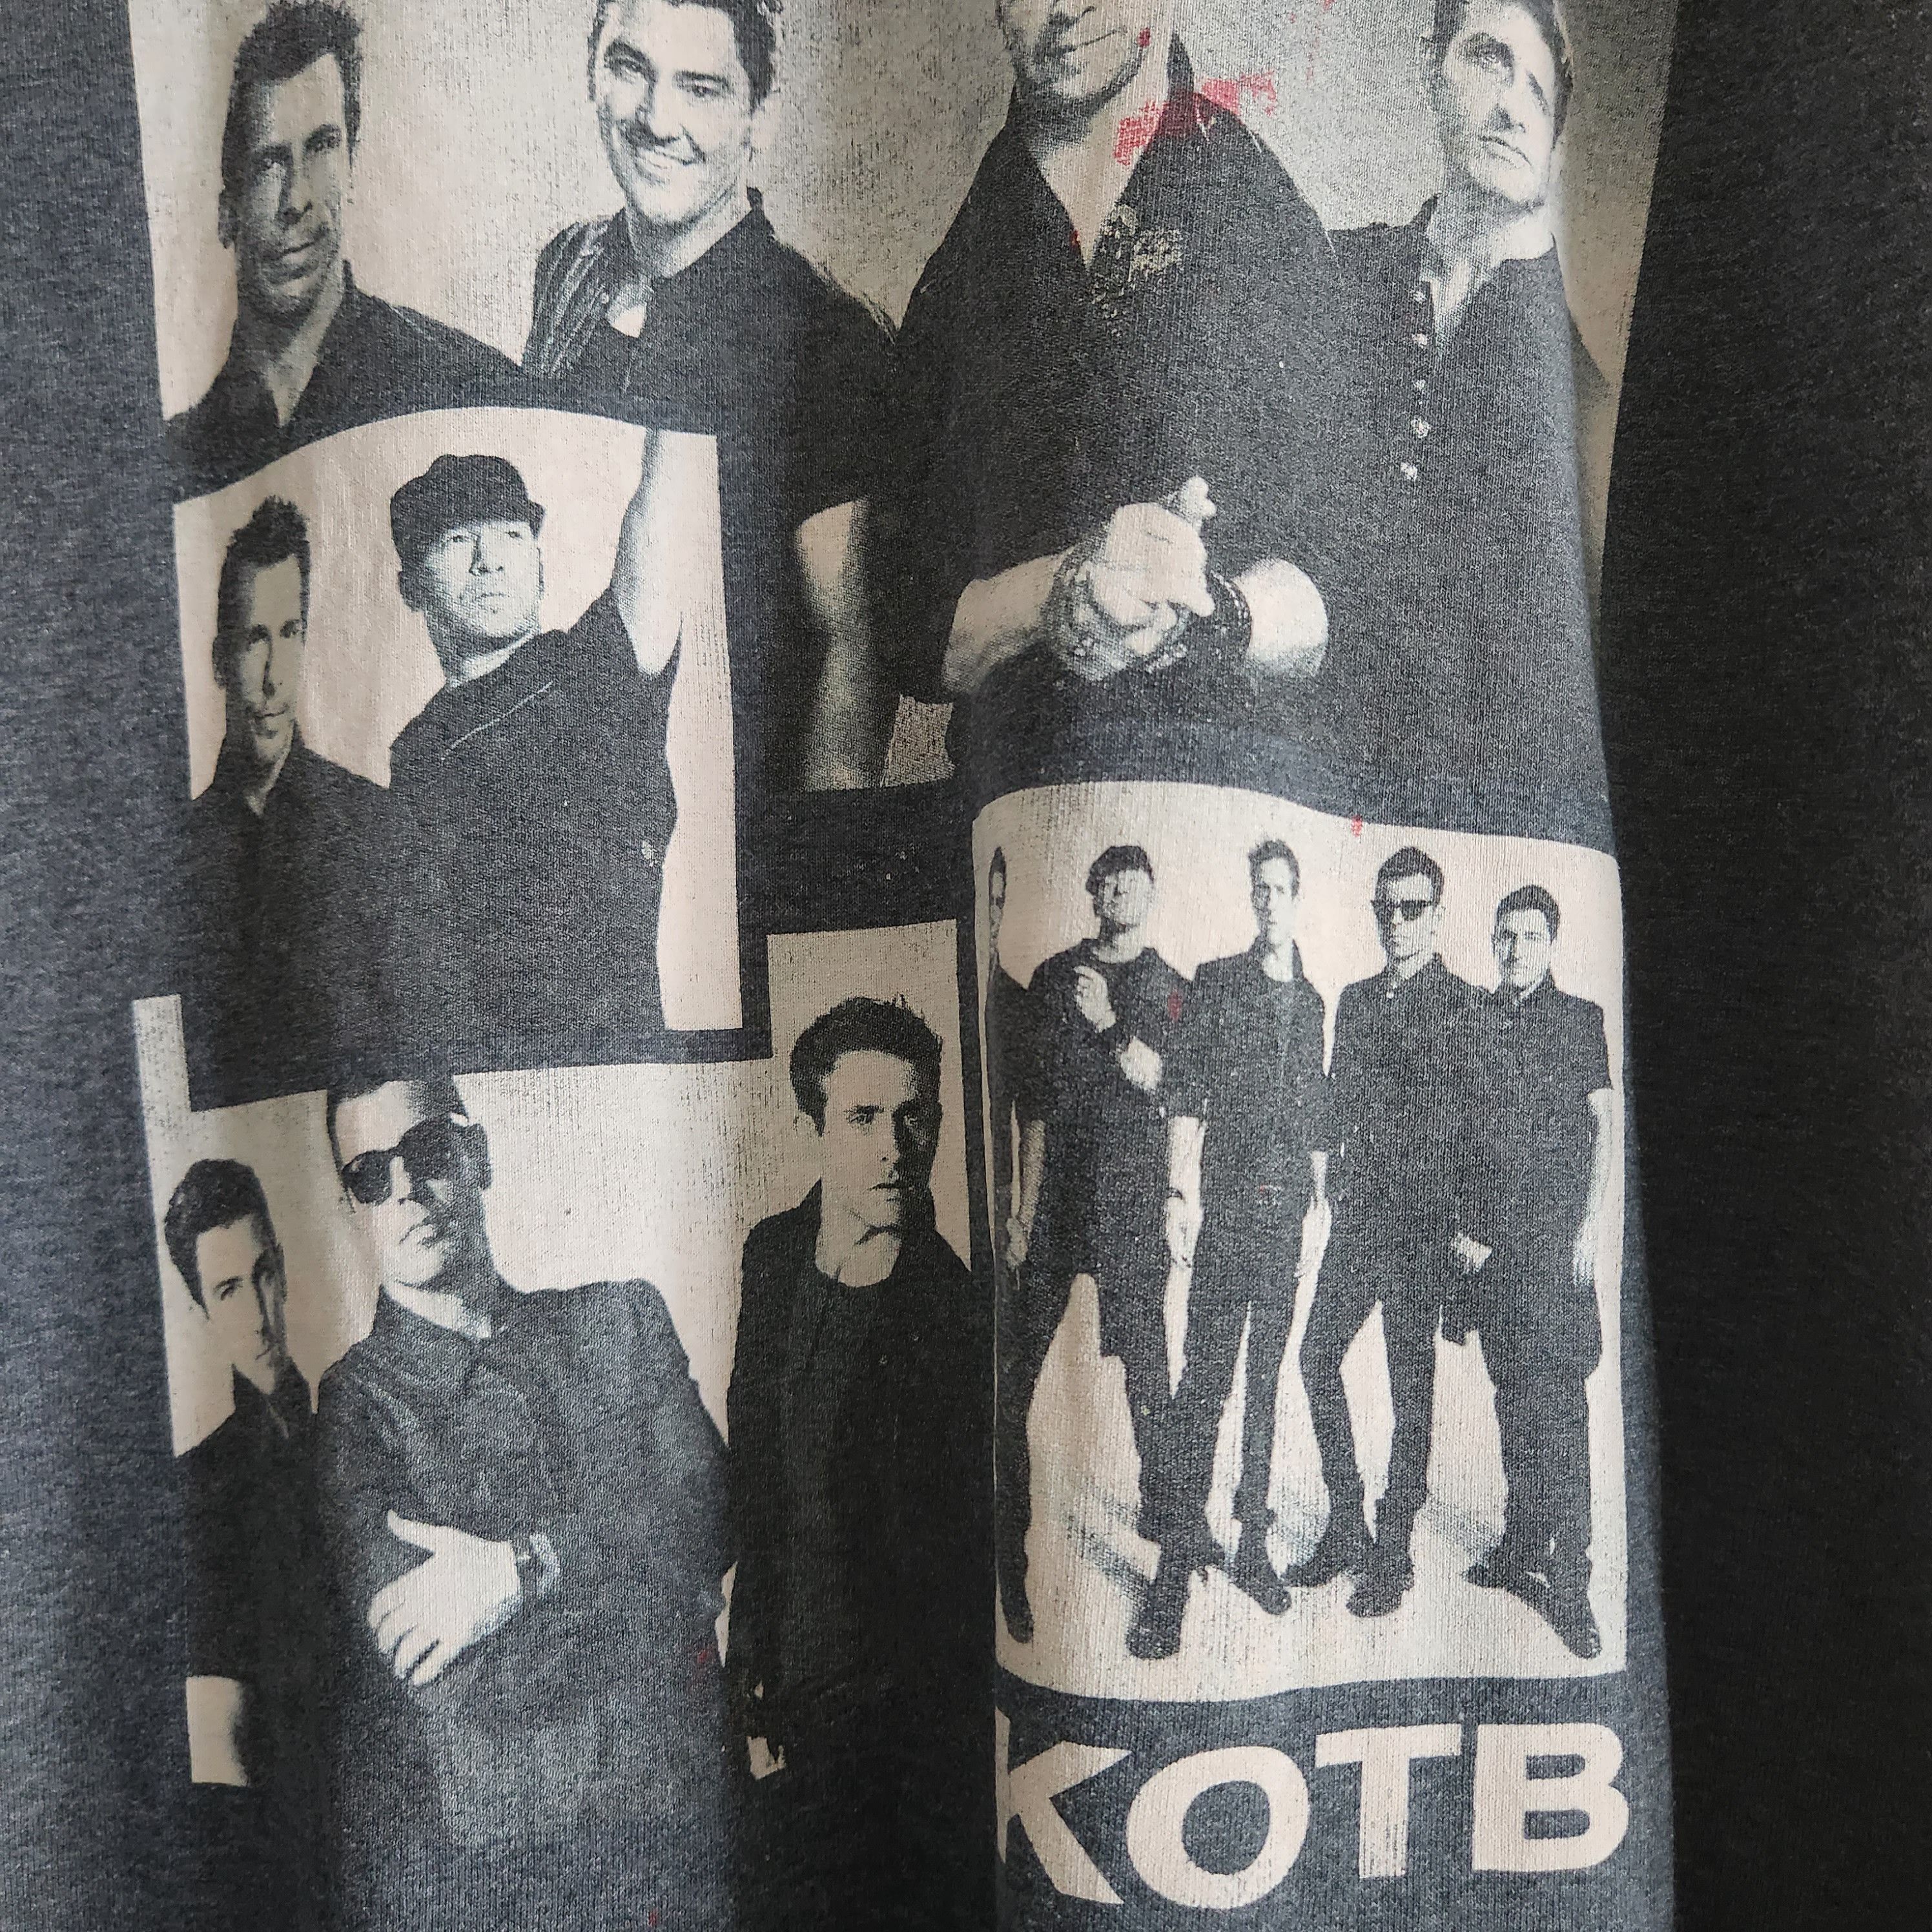 Band Tees - New Kids On The Block TShirt Copyright 2015 - 12